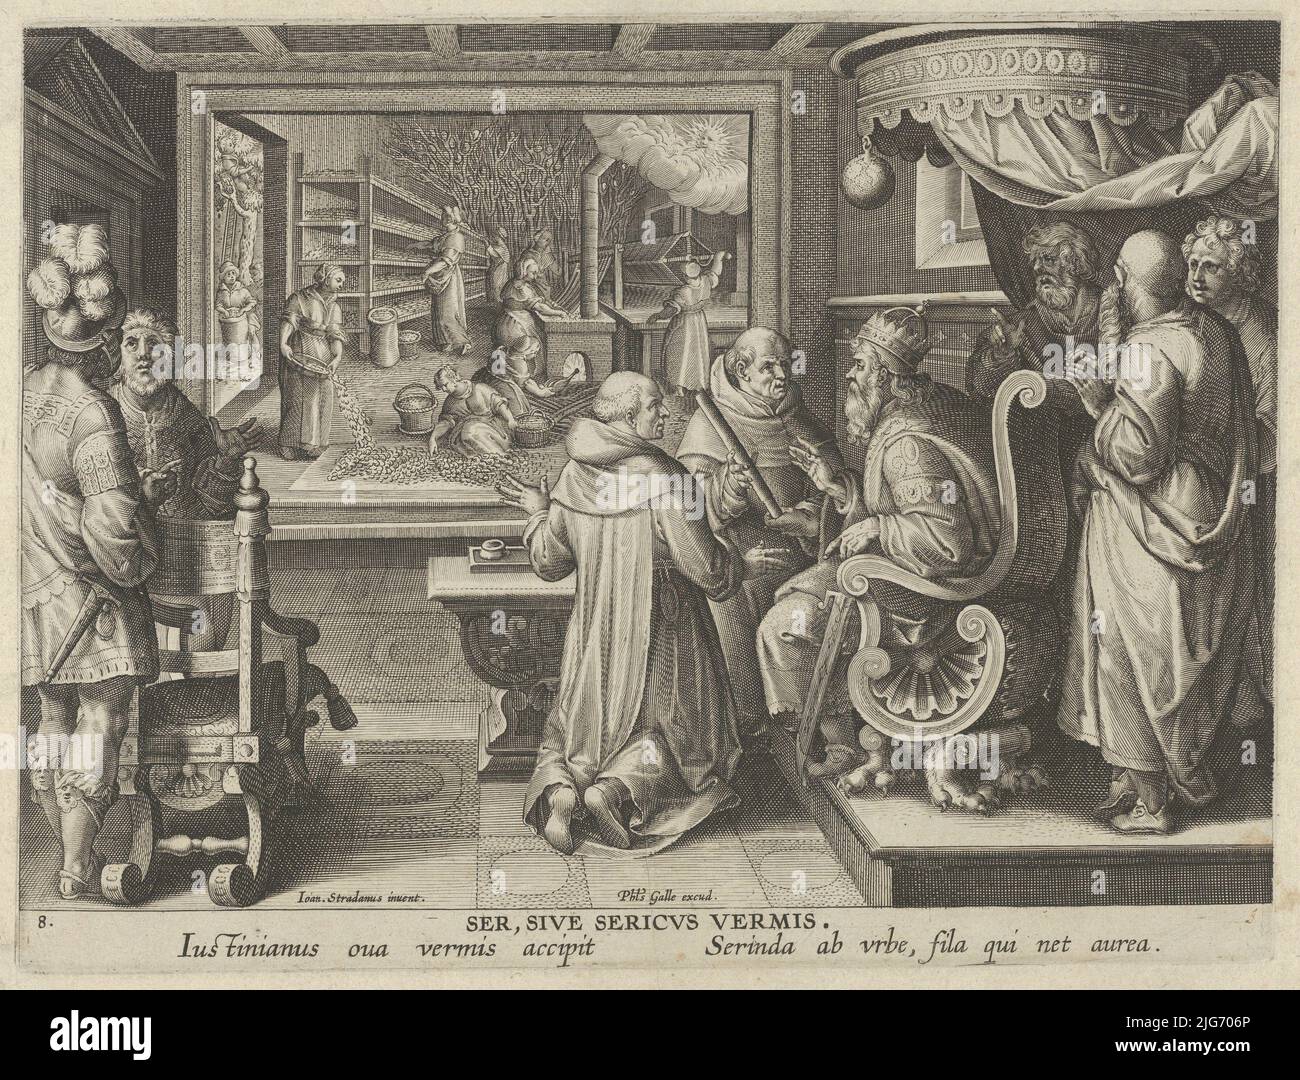 New Inventions of Modern Times [Nova Reperta], The Production of Silk, plate 8, ca. 1600. Stock Photo